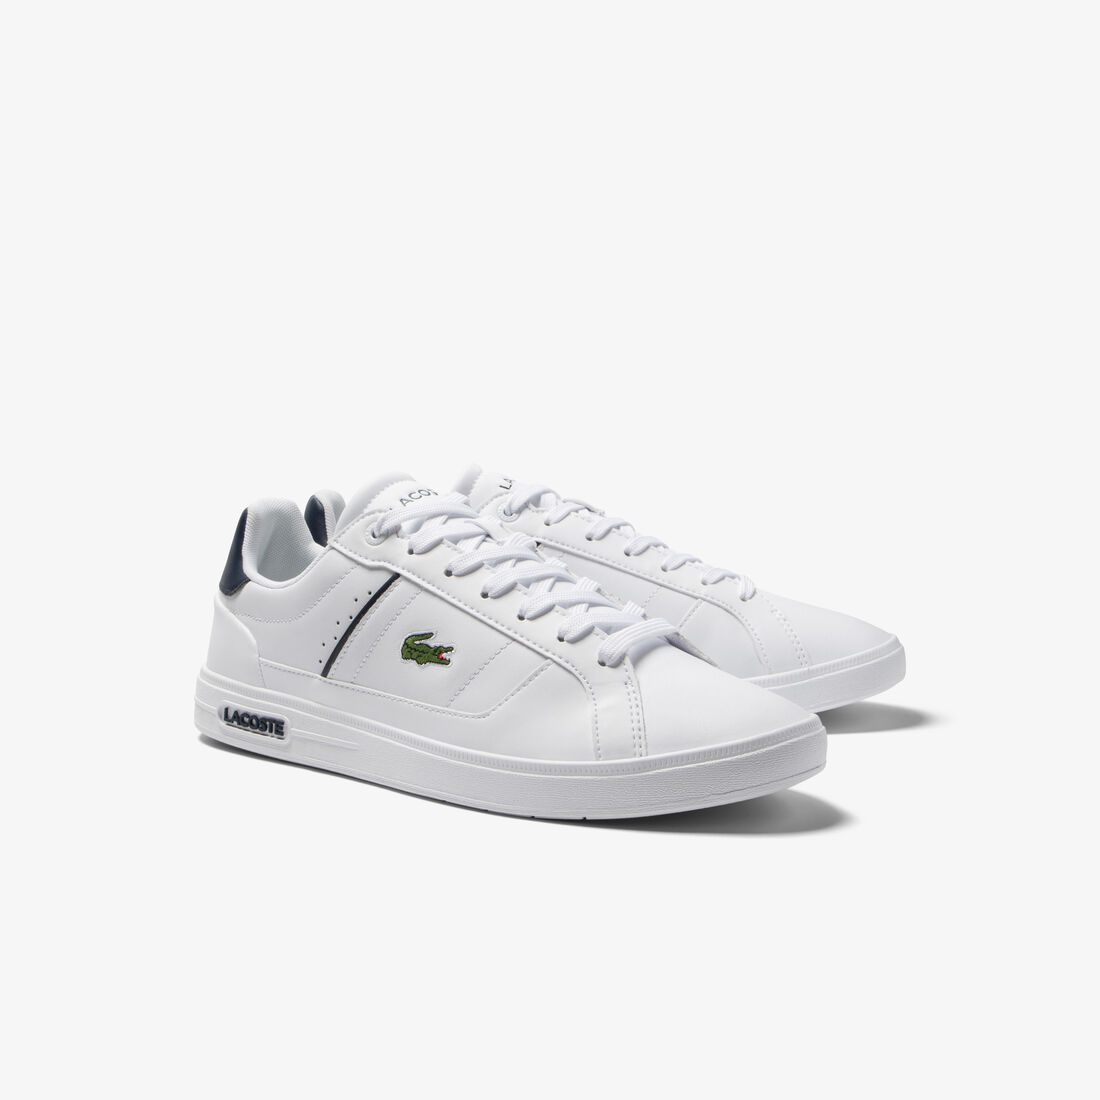 Men's Lacoste Europa Pro Leather Trainers - 45SMA0116-042